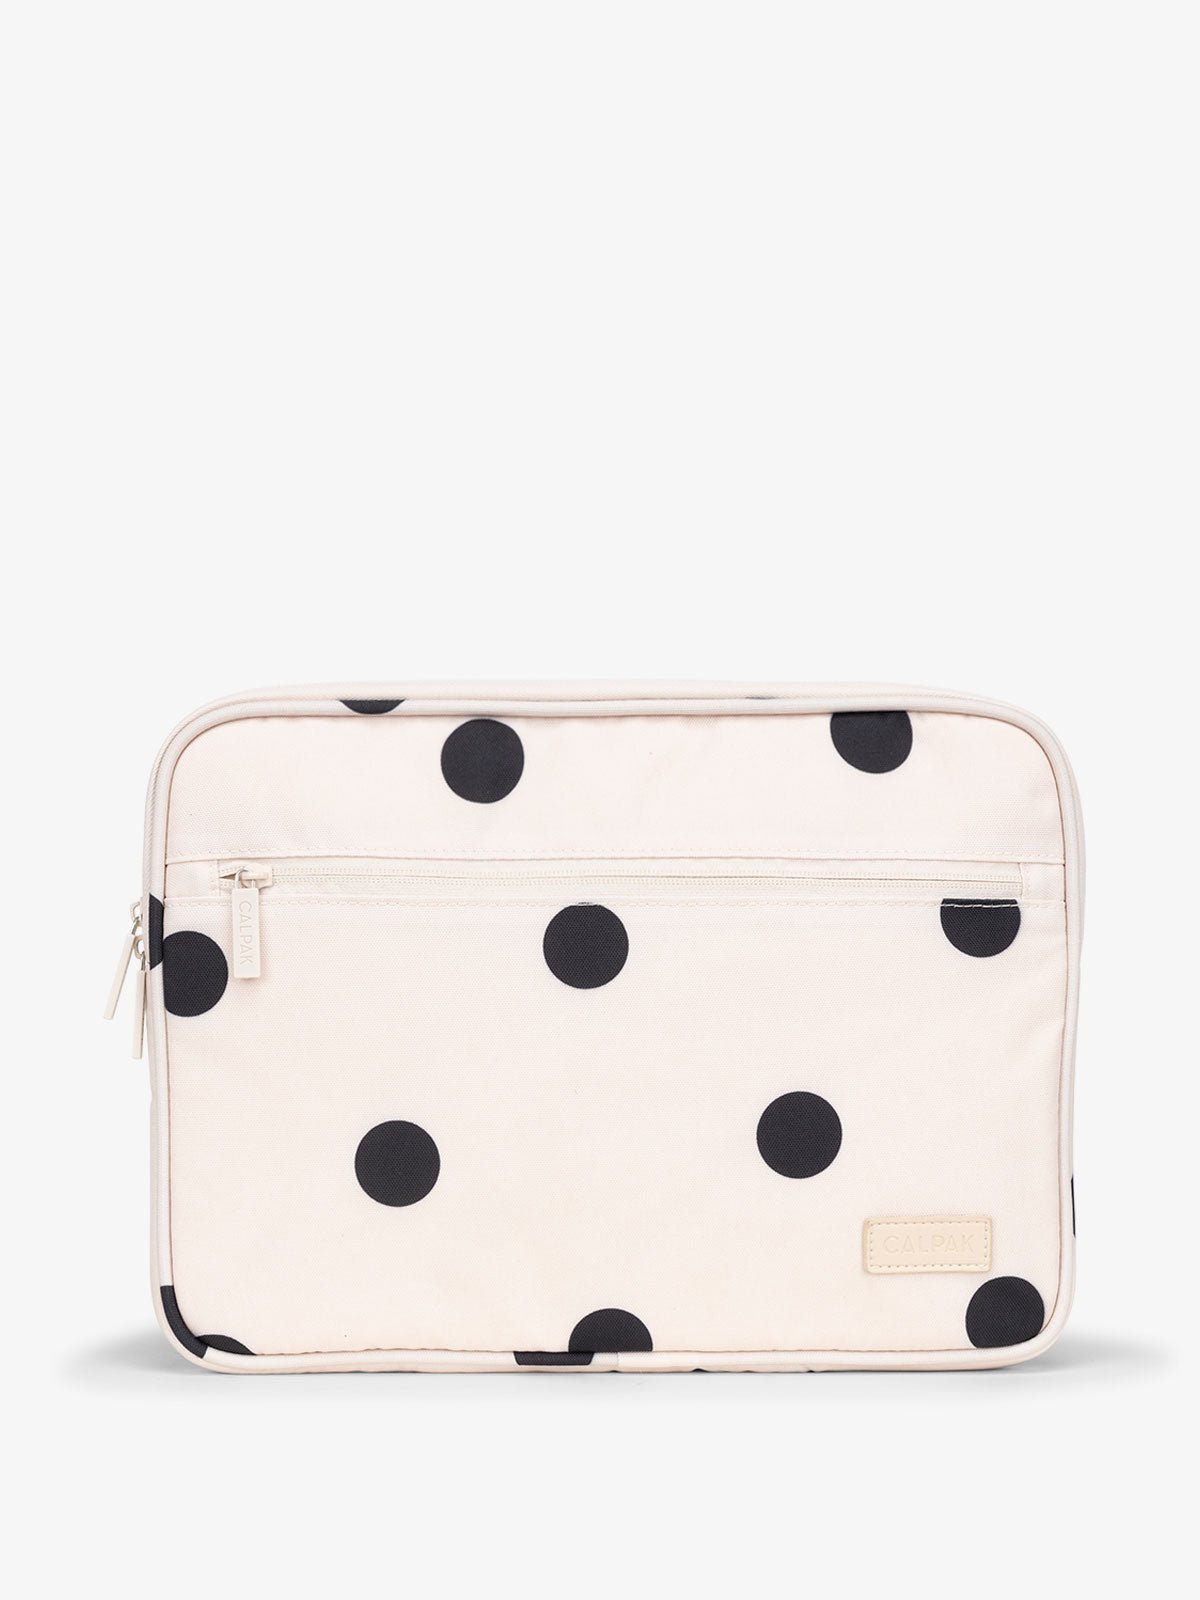 CALPAK 13-14 Inch Laptop Case with zippered front pocket in polka dot